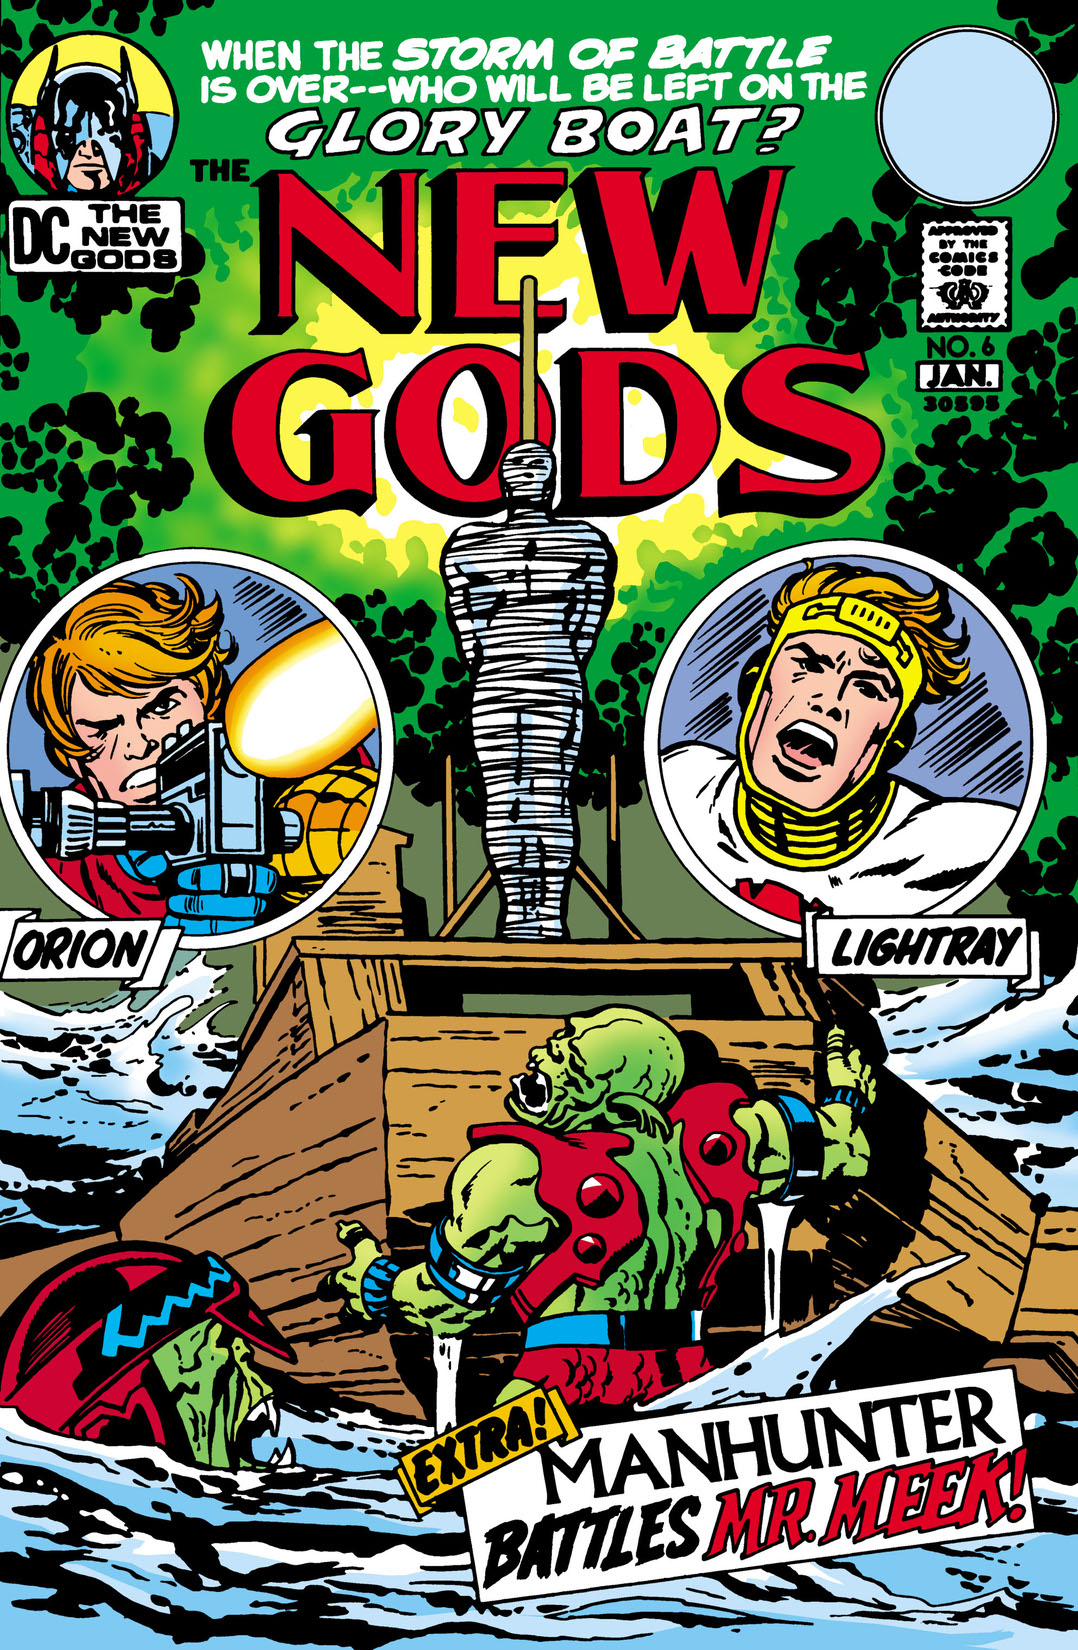 The New Gods #6 preview images